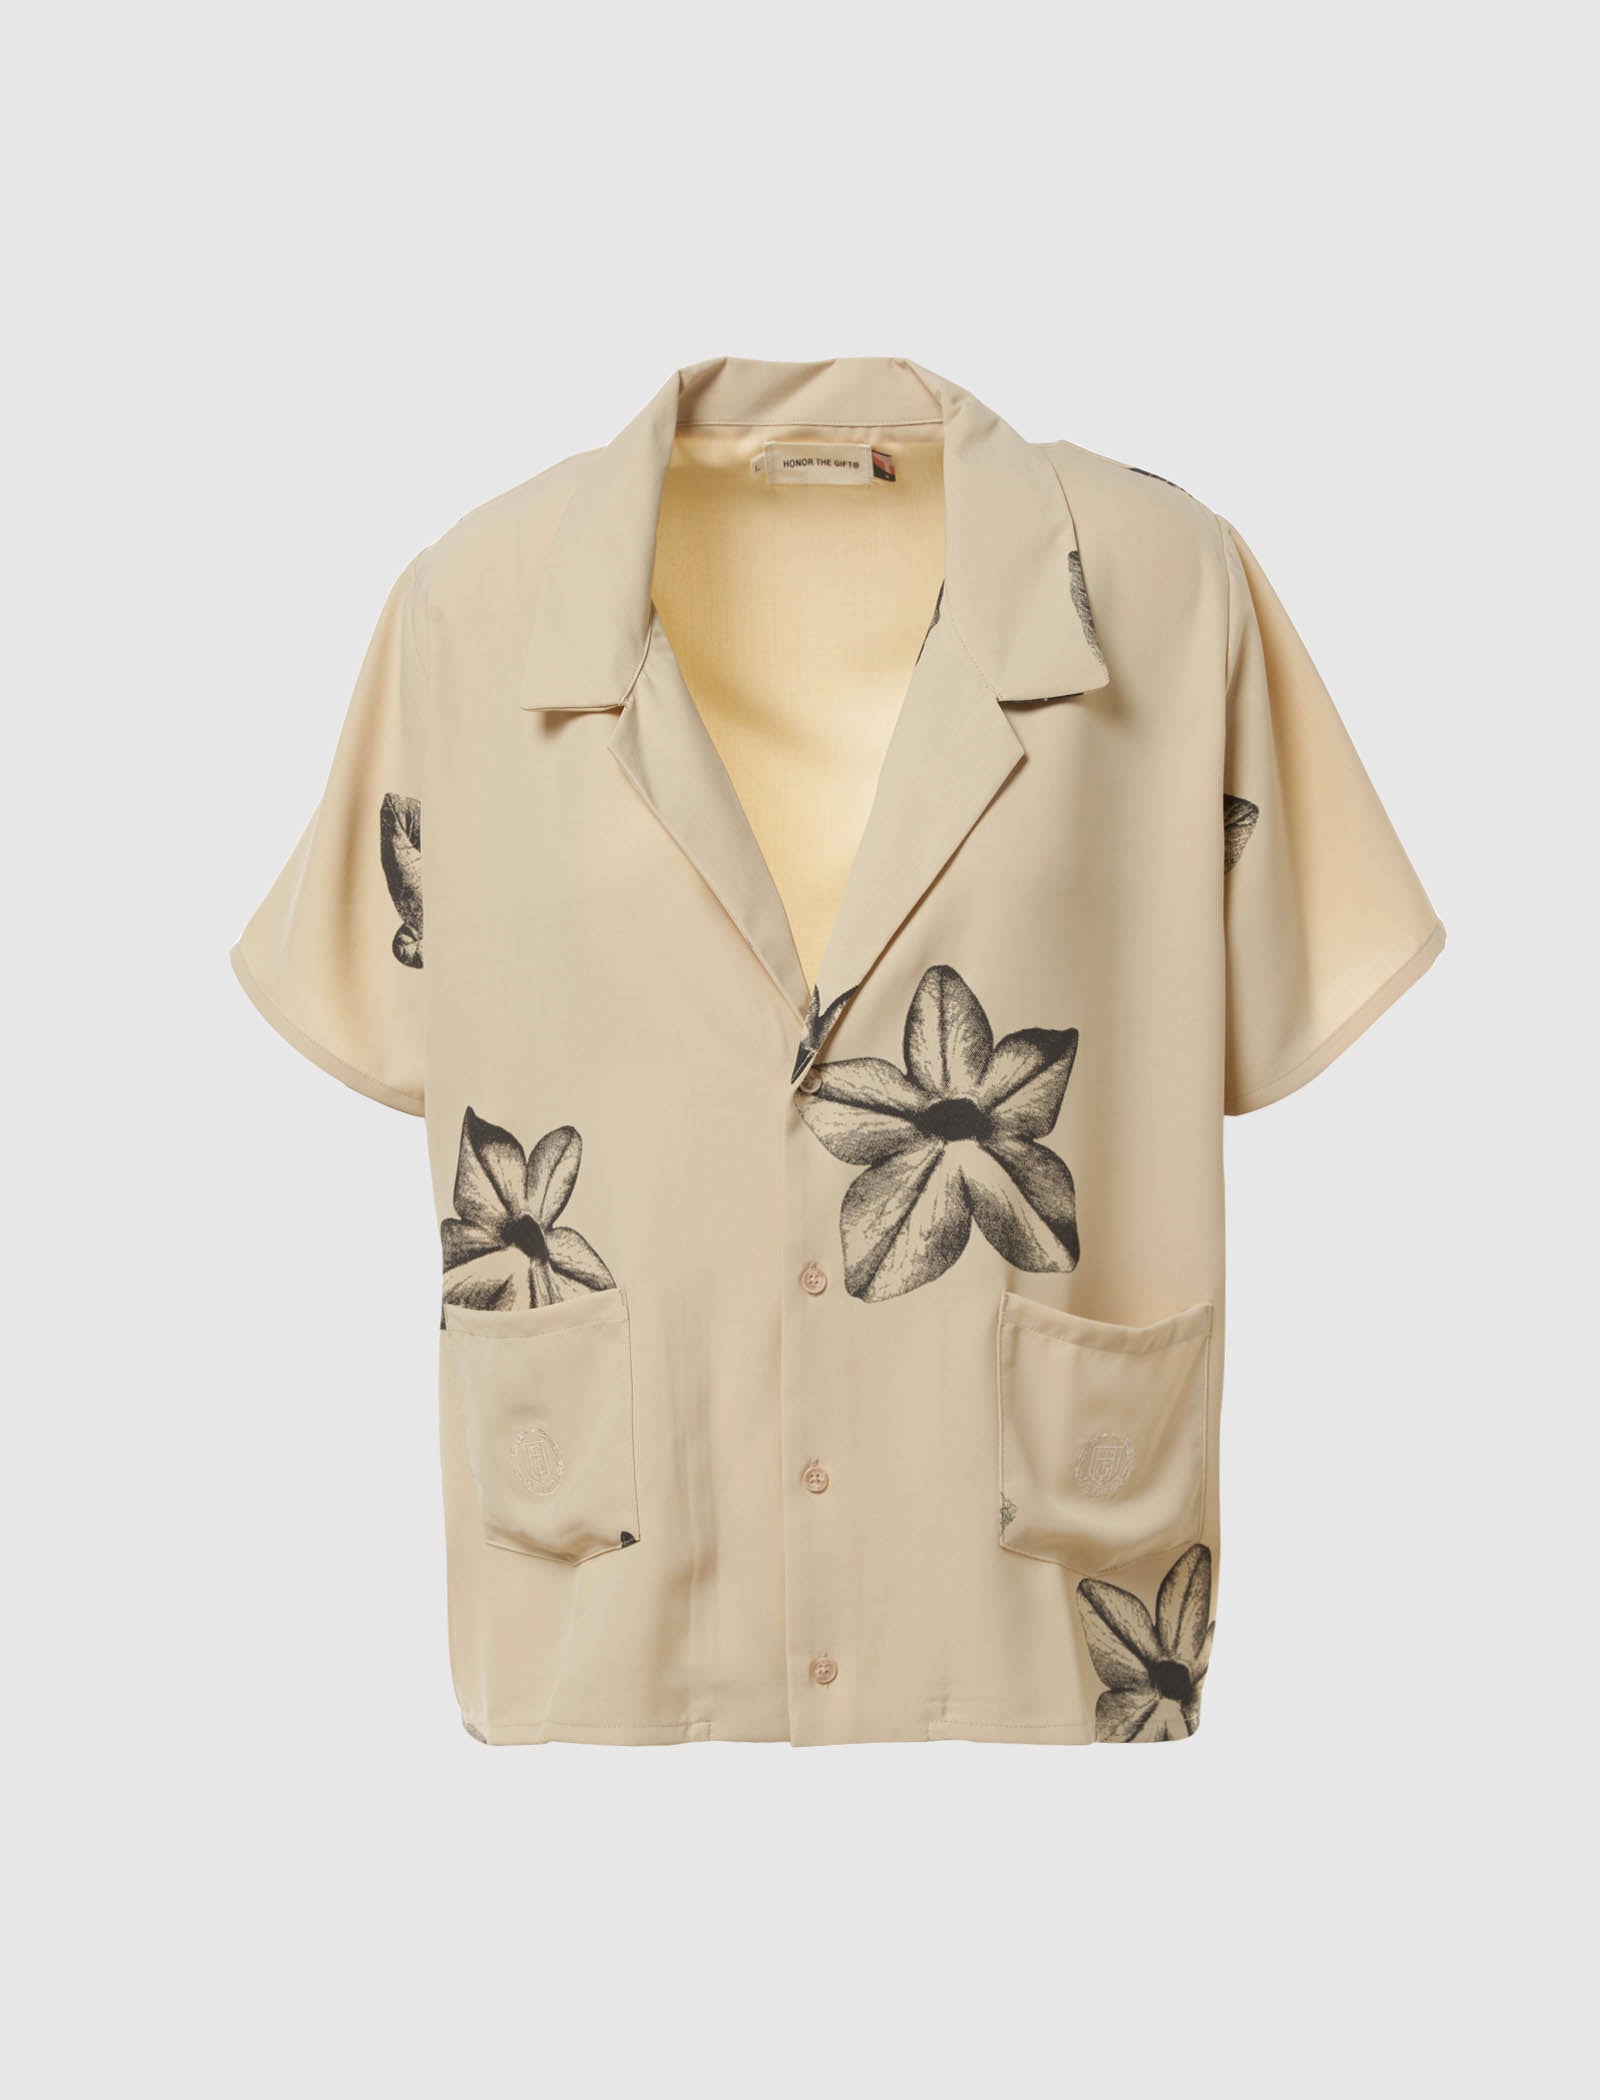 HONOR THE GIFT WOMEN'S FLORAL CAMP BUTTON UP SHIRT